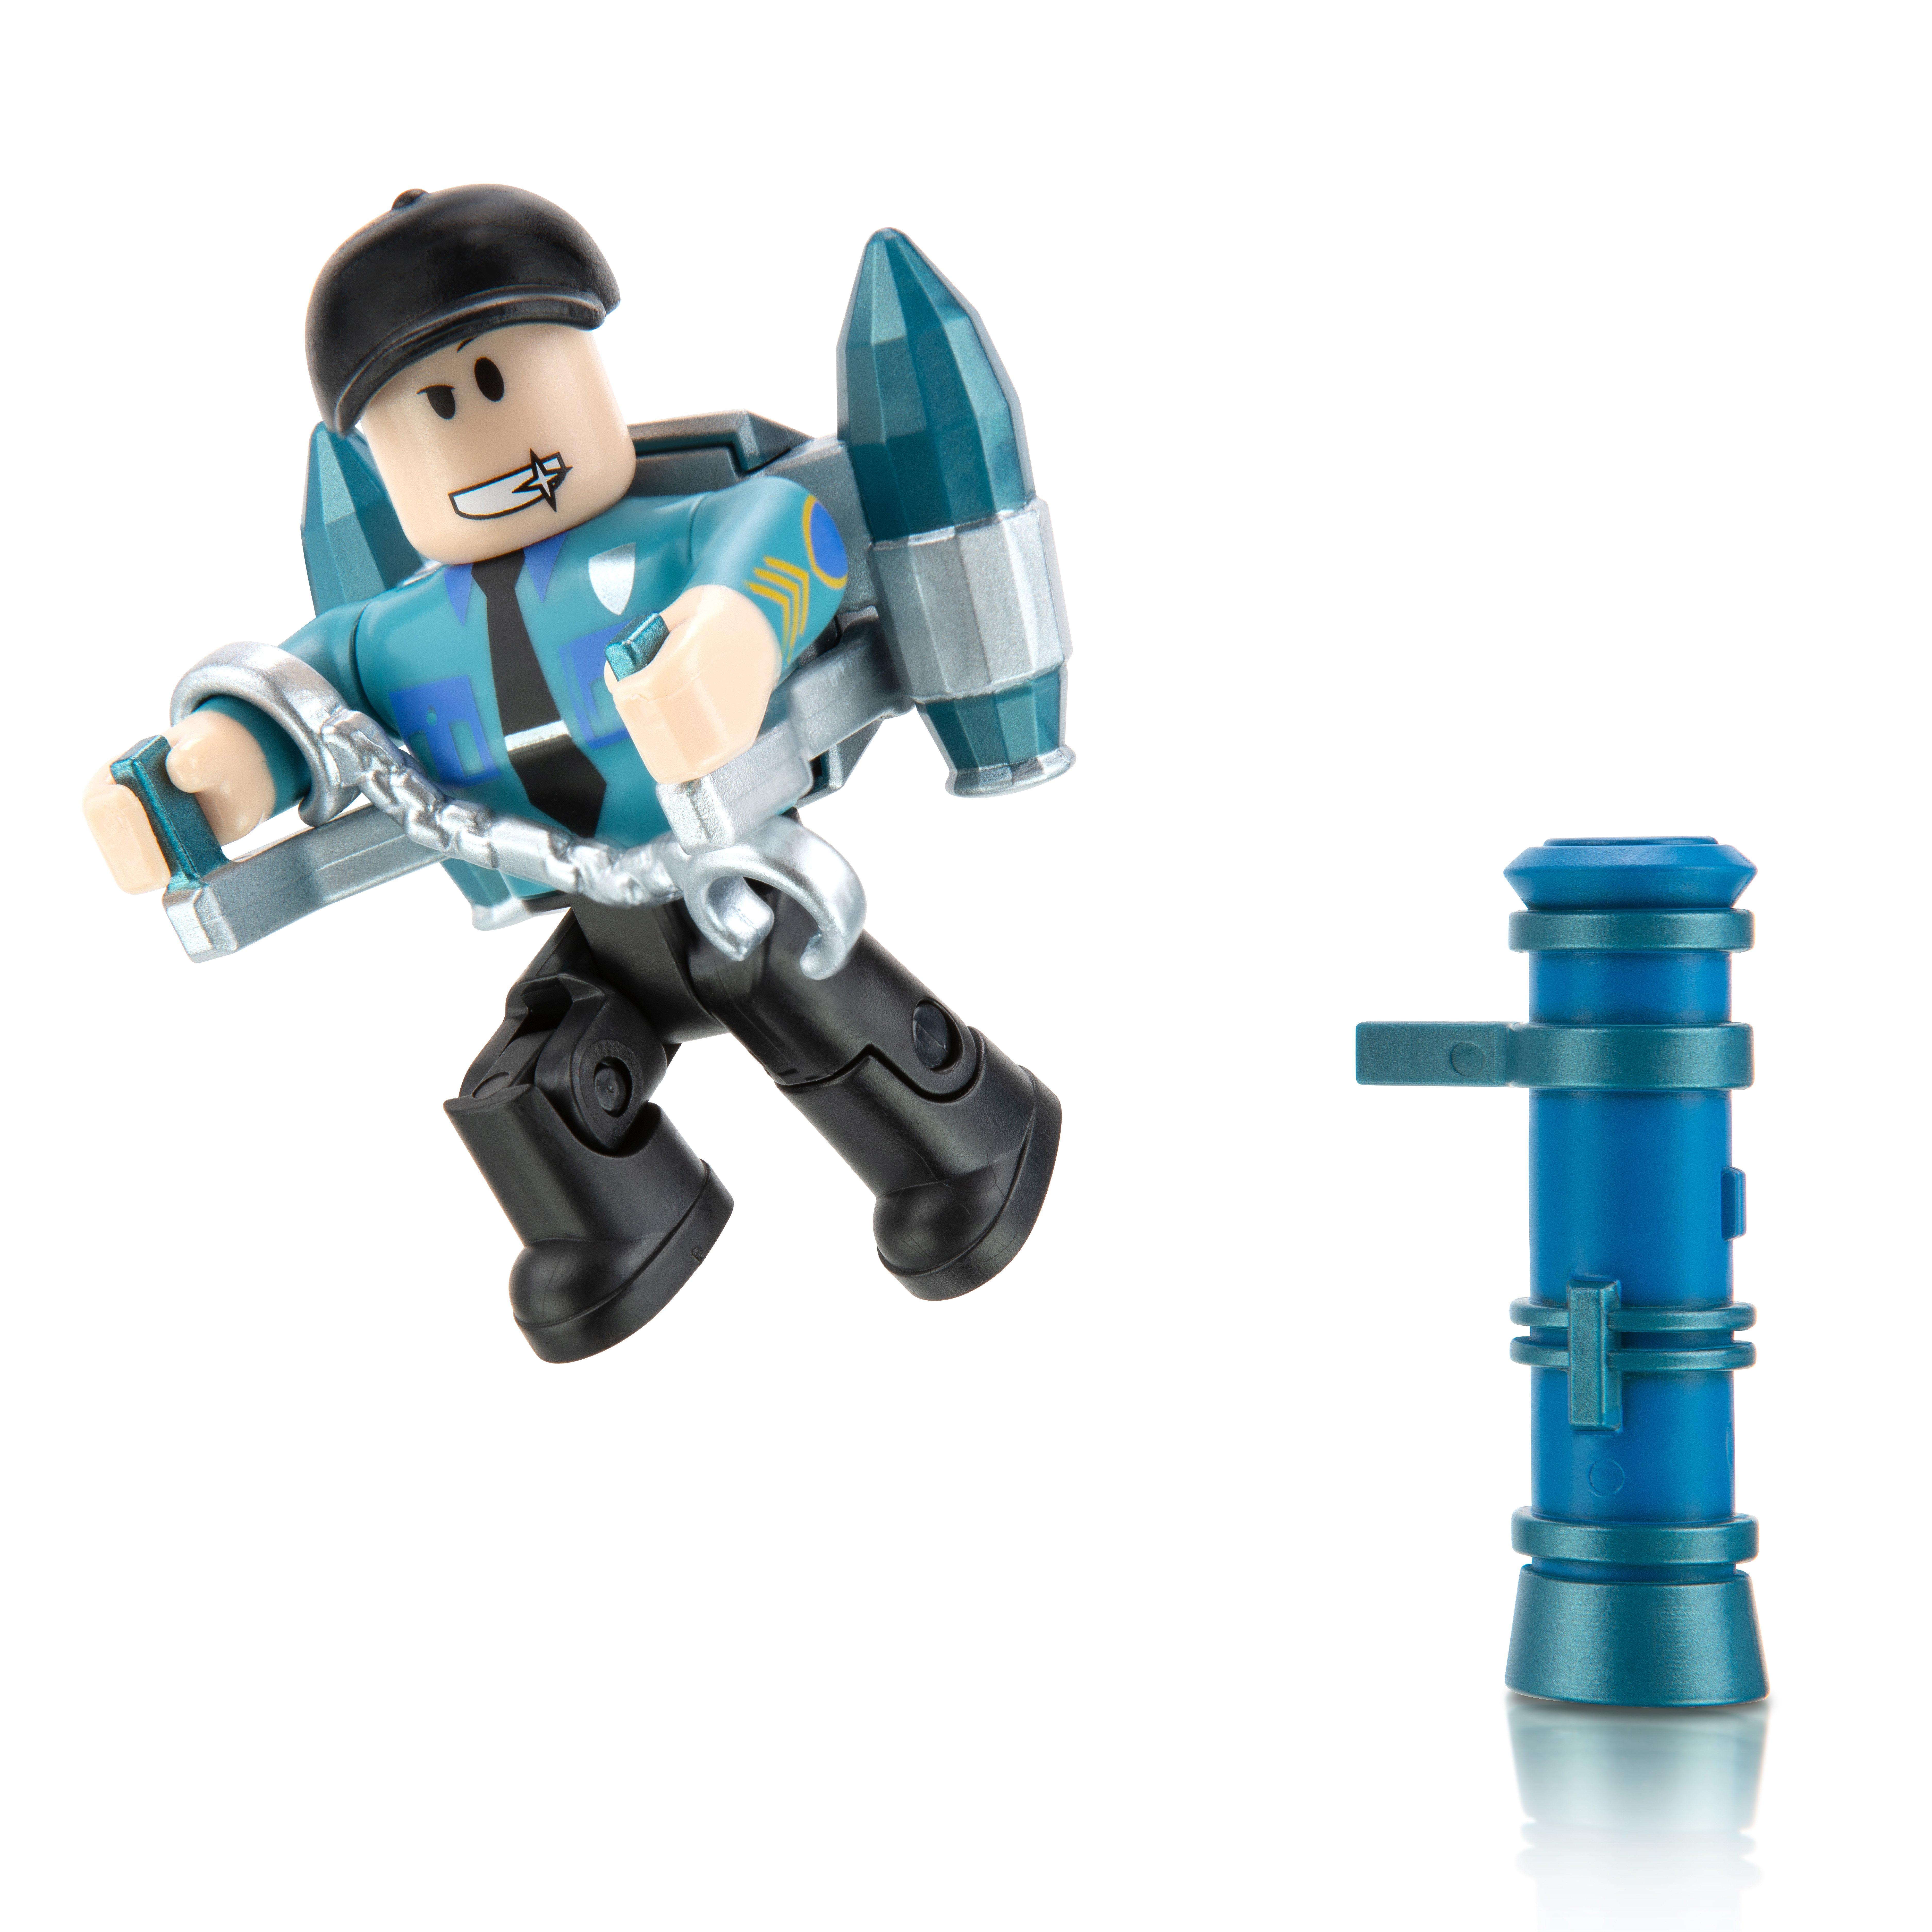 Roblox Action Collection Single Figure Pack Includes 1 Exclusive Virtual Item Styles May Vary Gamestop - action figure roblox noob toy